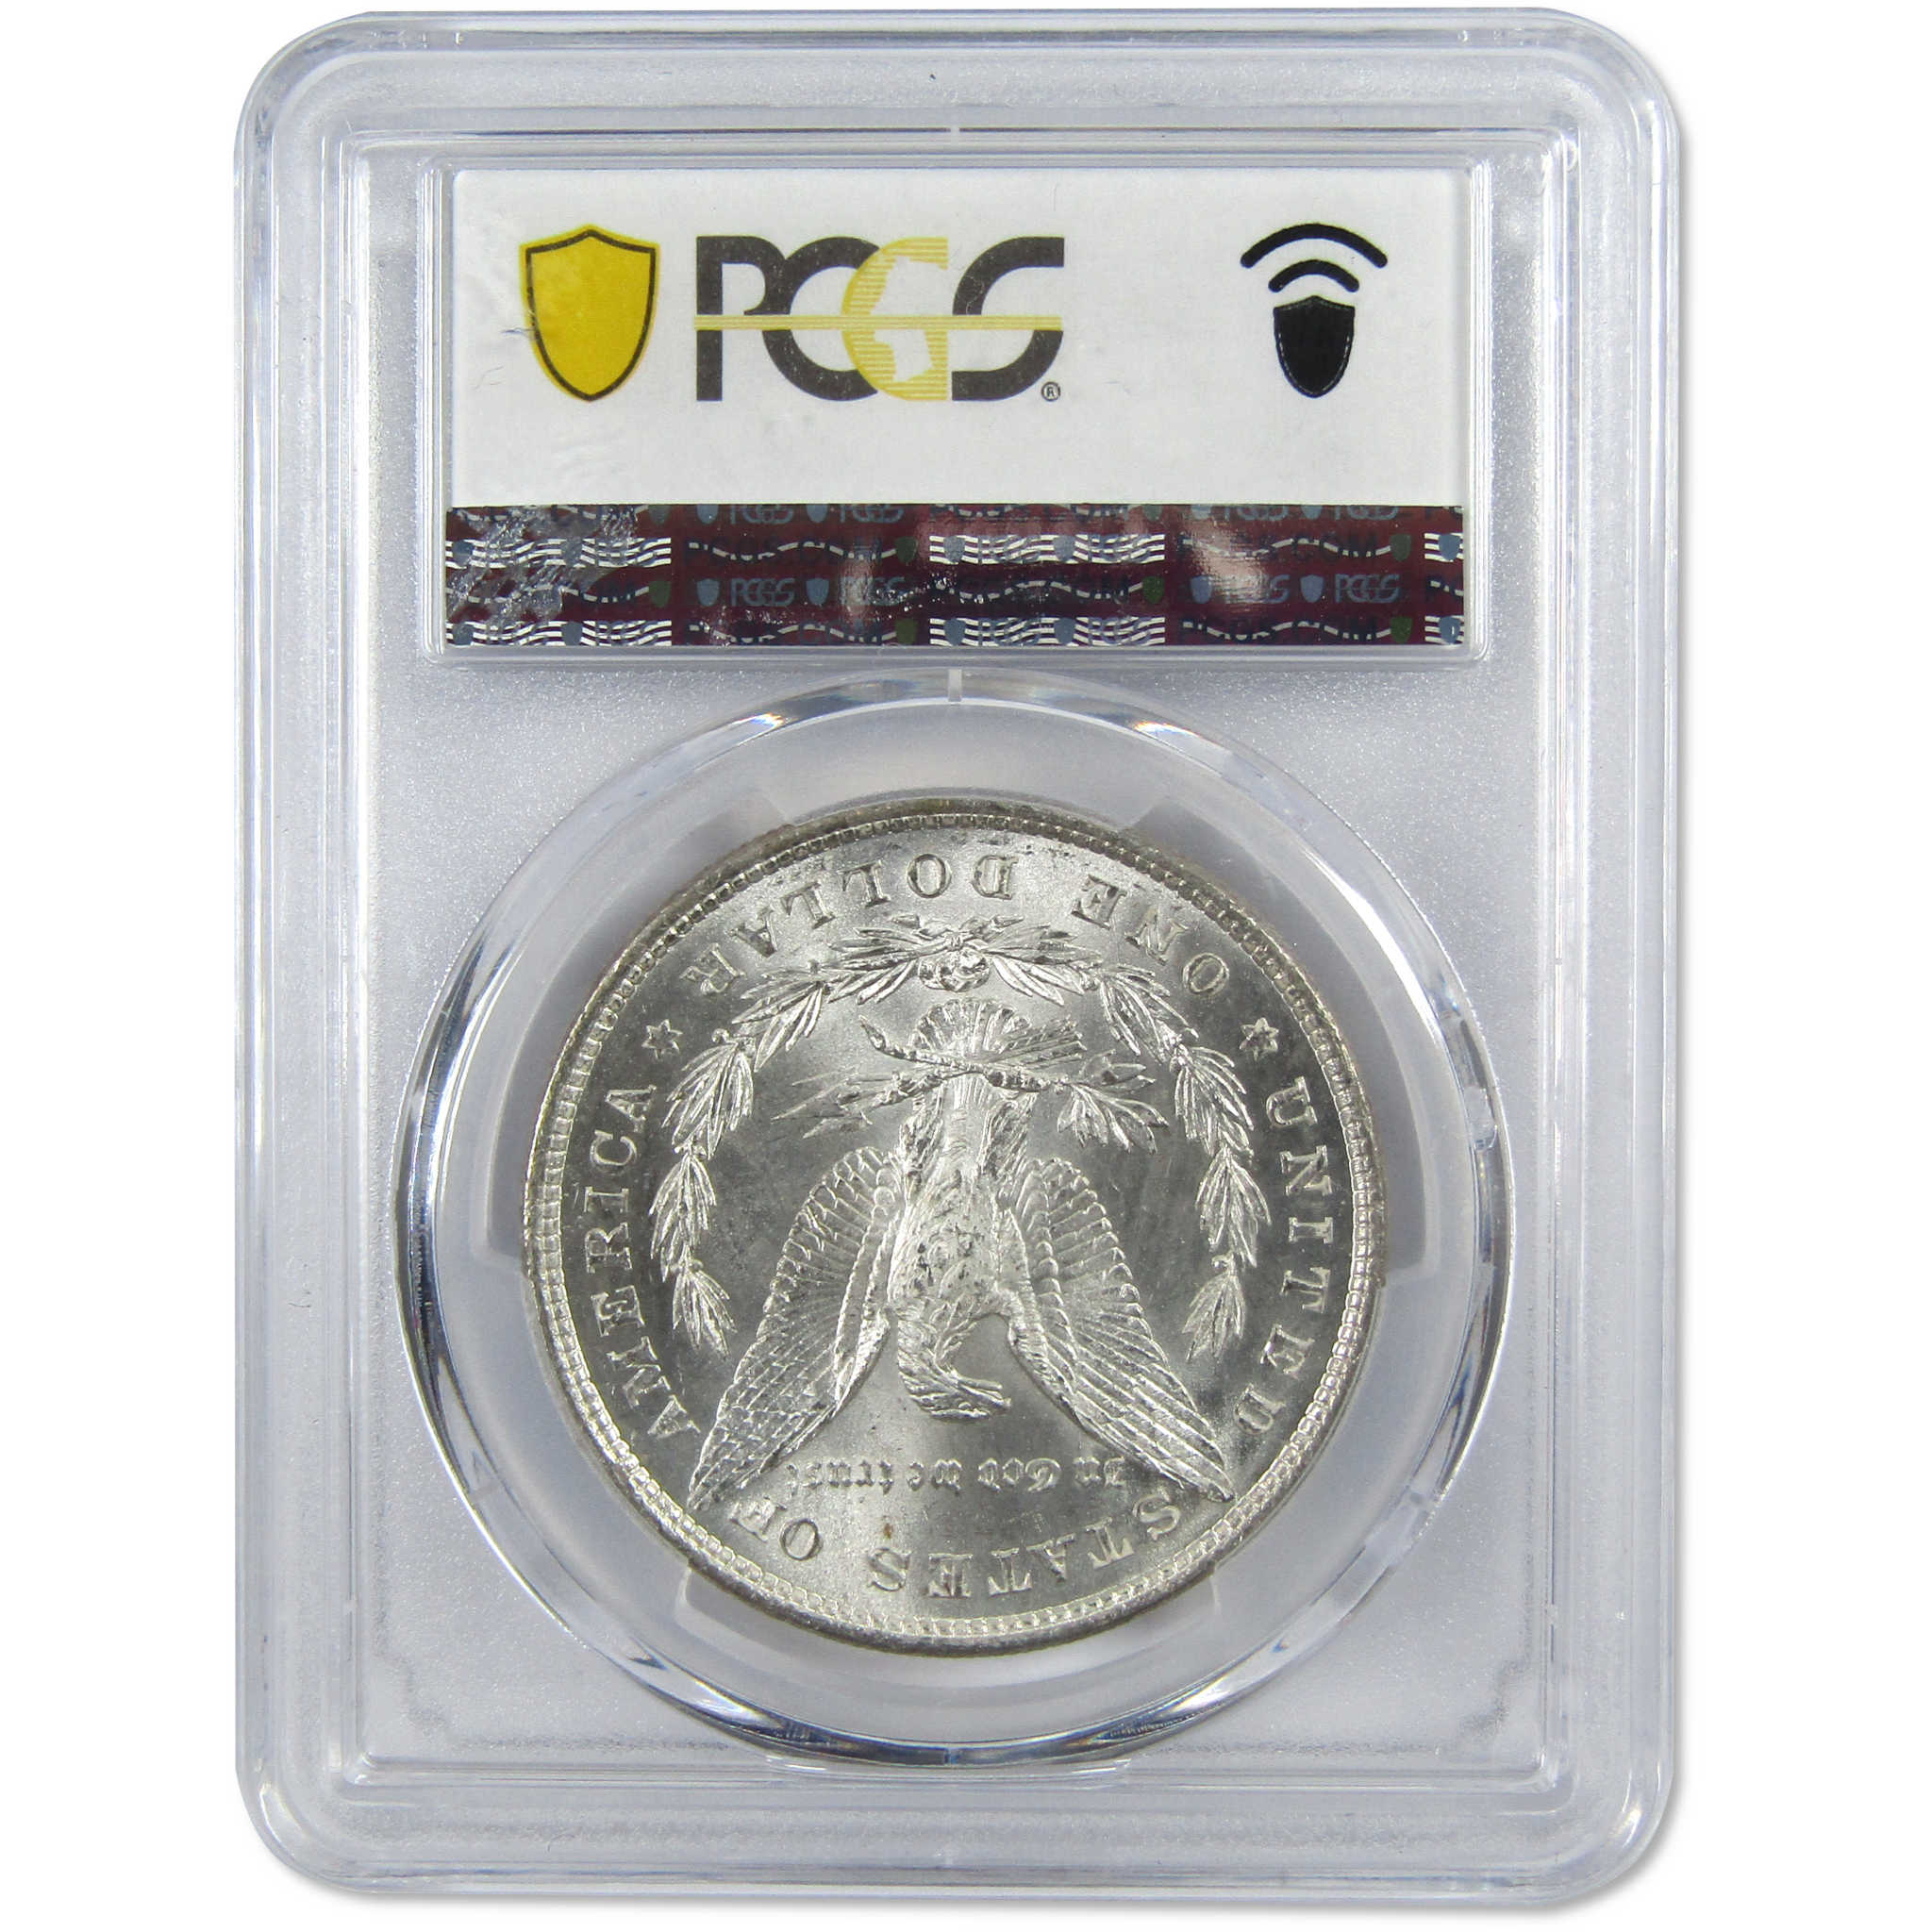 1878 8TF Morgan Dollar MS 63 PCGS 90% Silver $1 Uncirculated SKU:I5904 - Morgan coin - Morgan silver dollar - Morgan silver dollar for sale - Profile Coins &amp; Collectibles